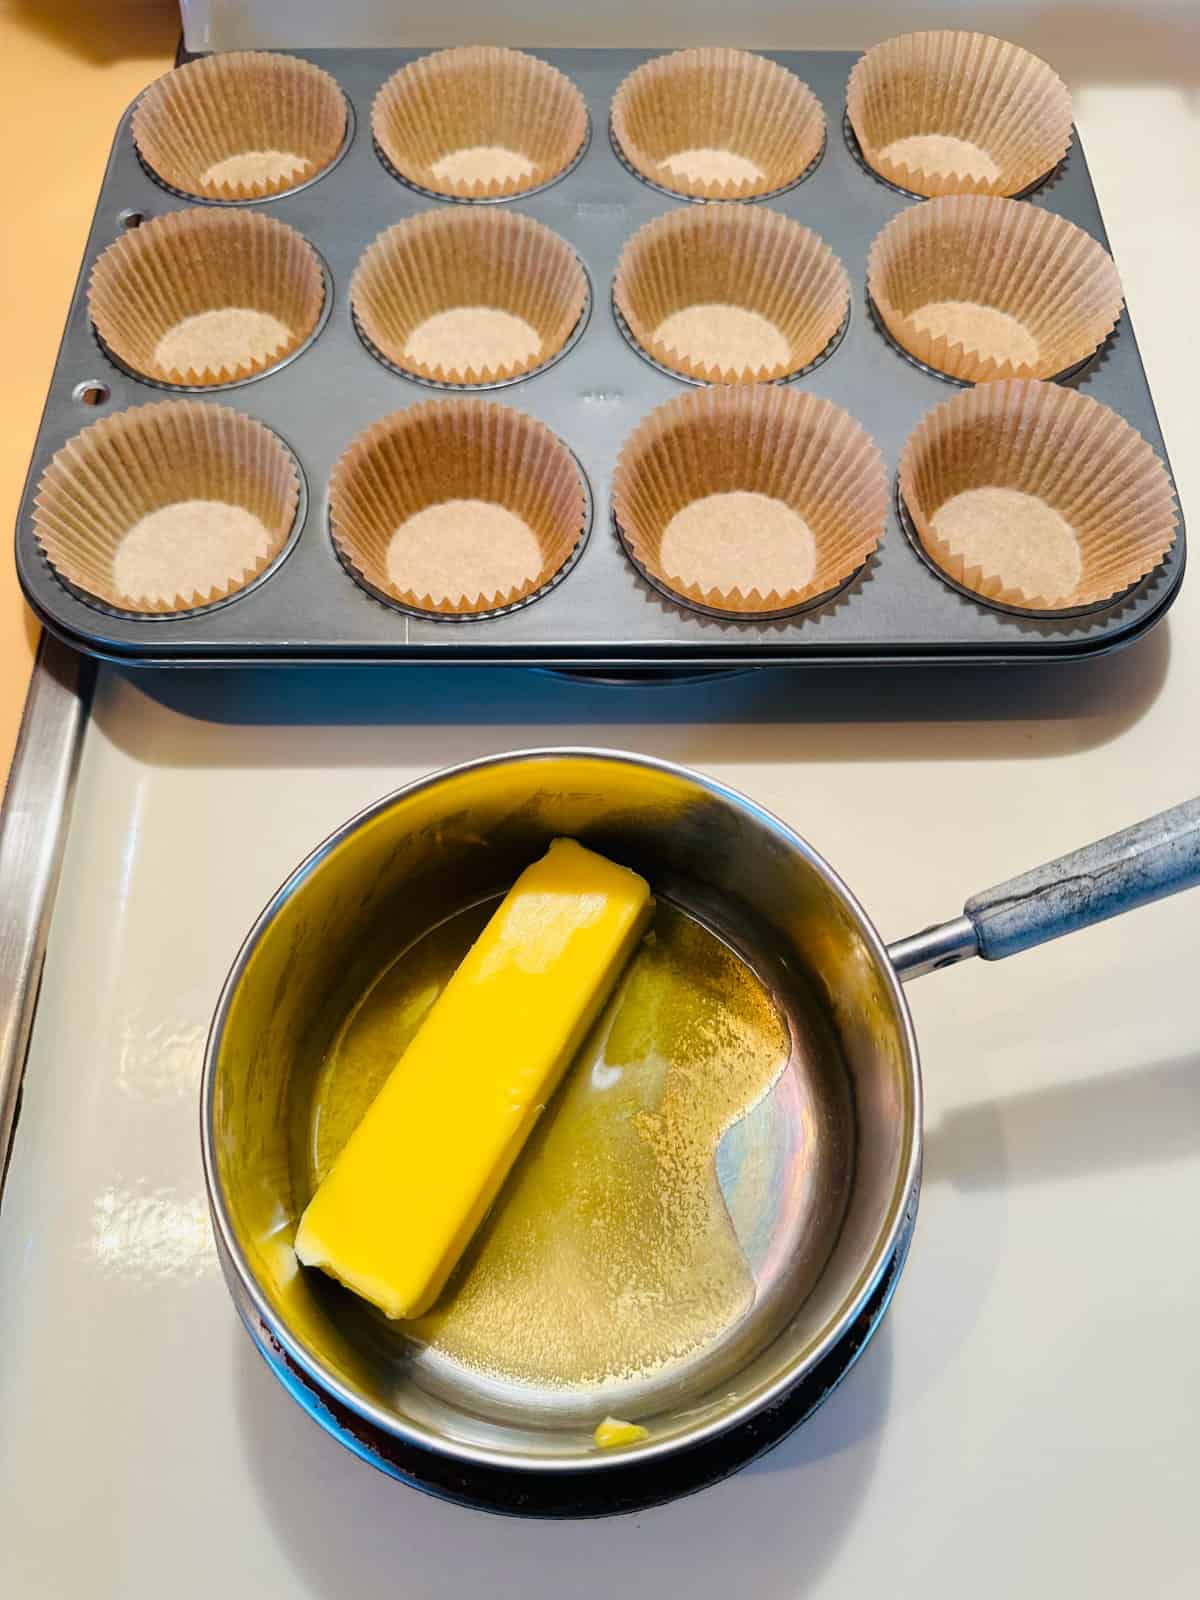 Butter melting in small pot on stove and muffin tin behind it.